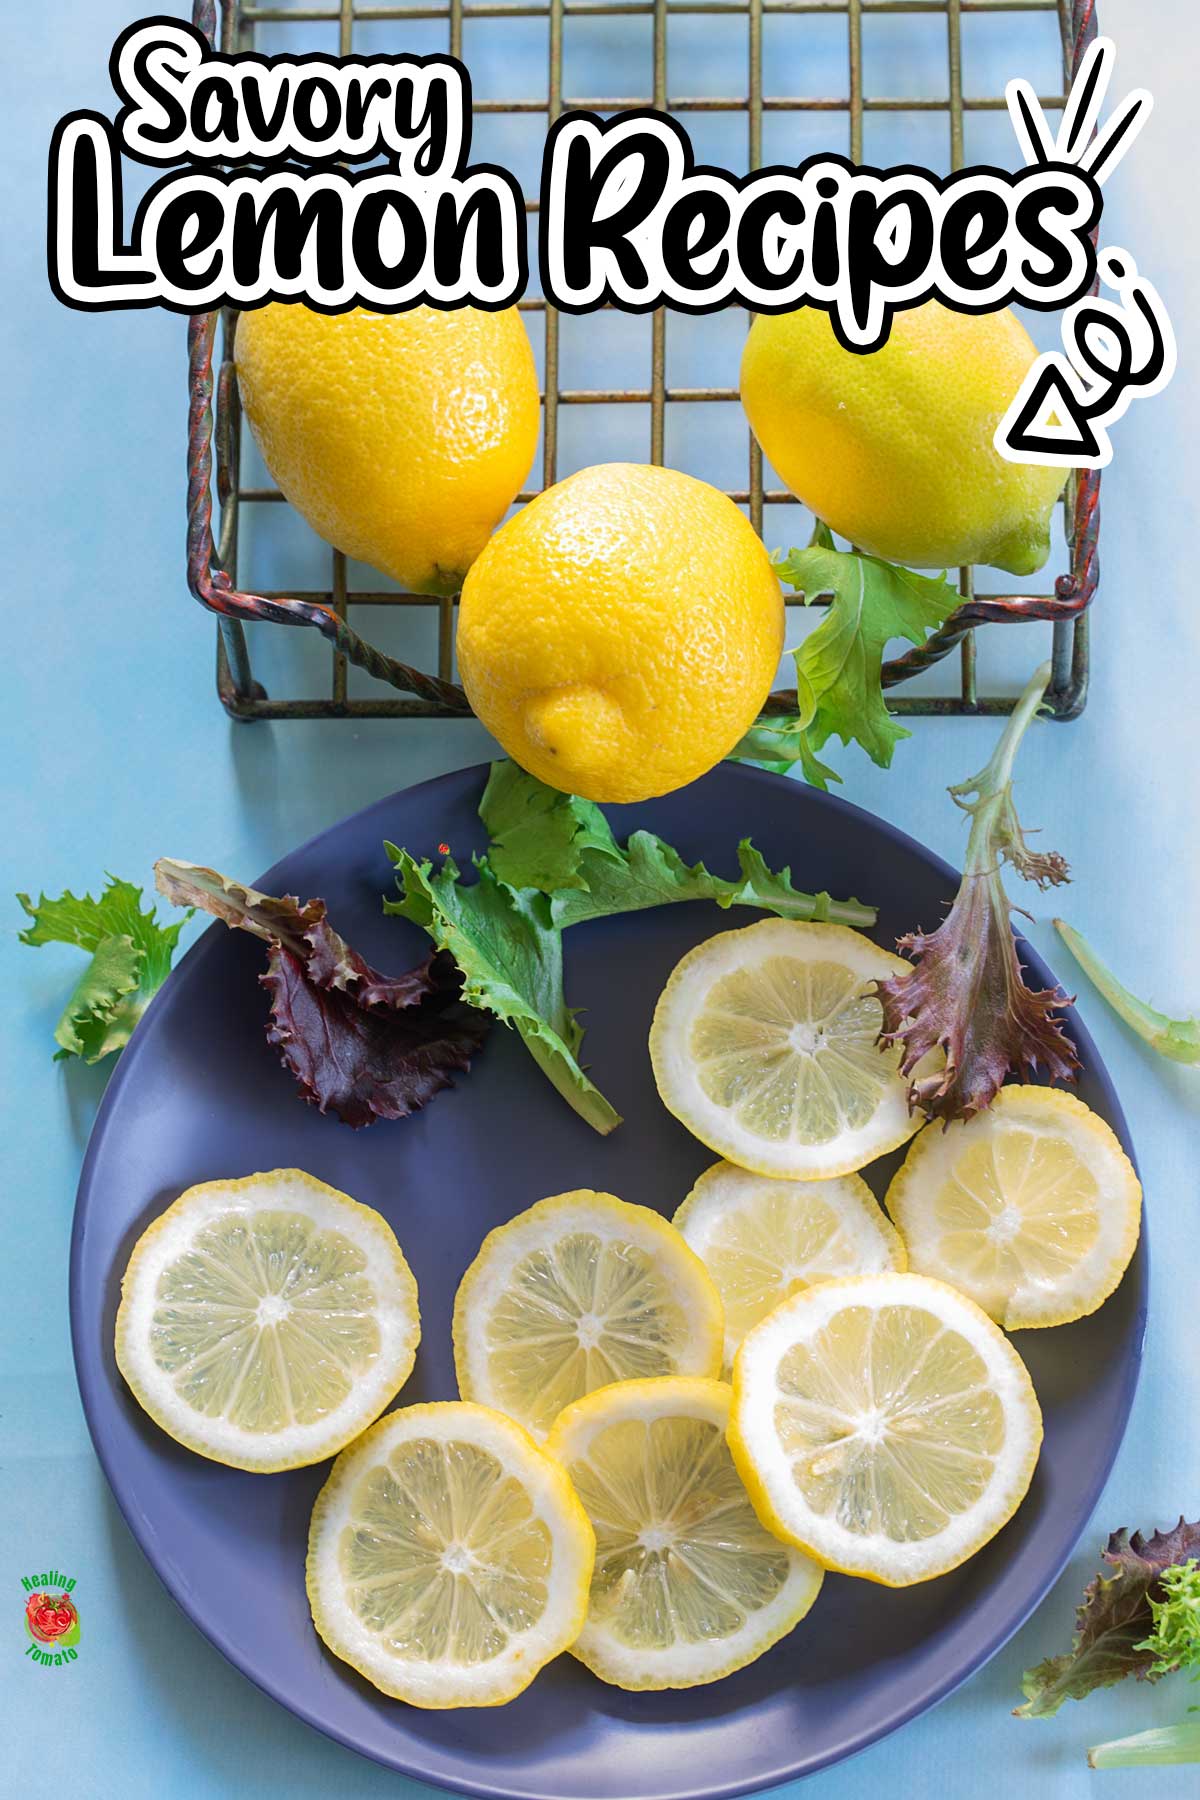 Top view of lemon slices on a blue plate. Above the plate, there is a wire rack with 3 whole lemons in it. Savory lemon recipes